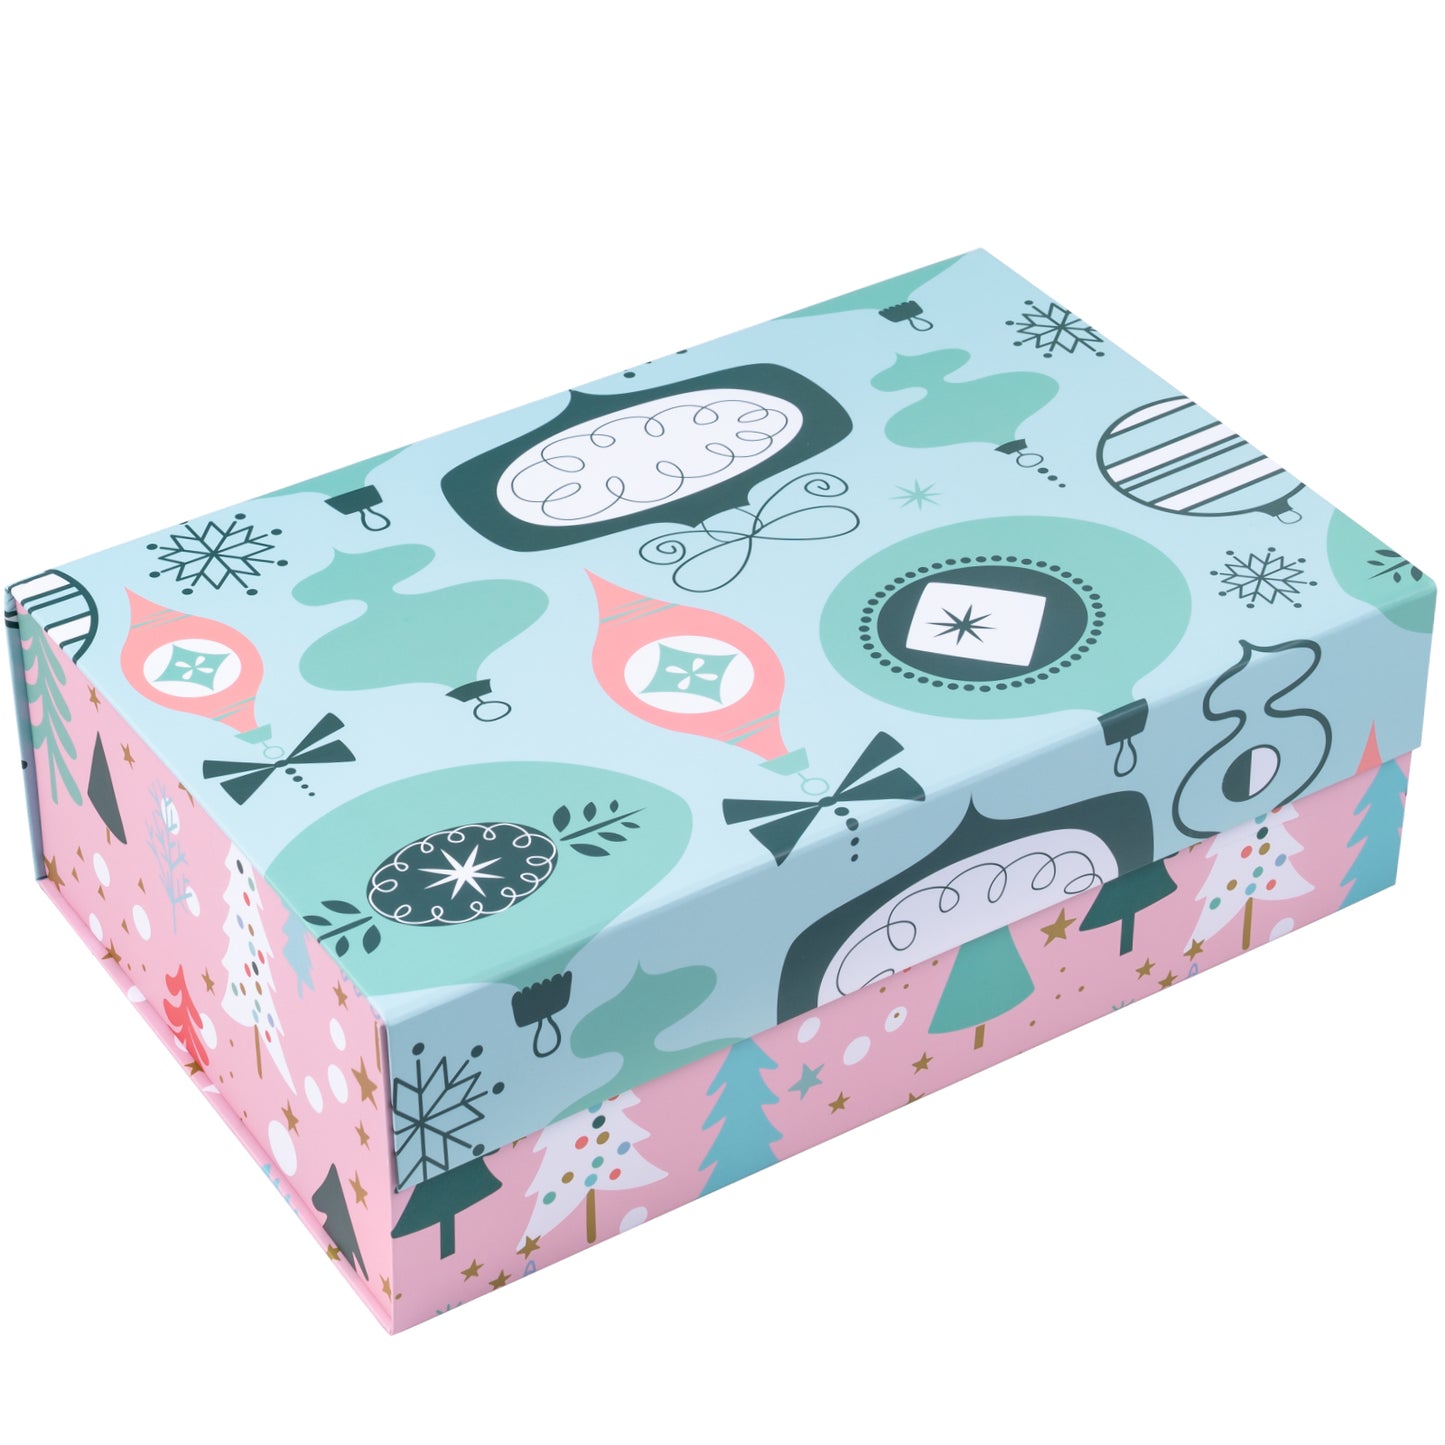 35x23x10cm Collapsible Gift Box Magnetic Closure Pink & Blue Wedding Party Christmas Wrapping